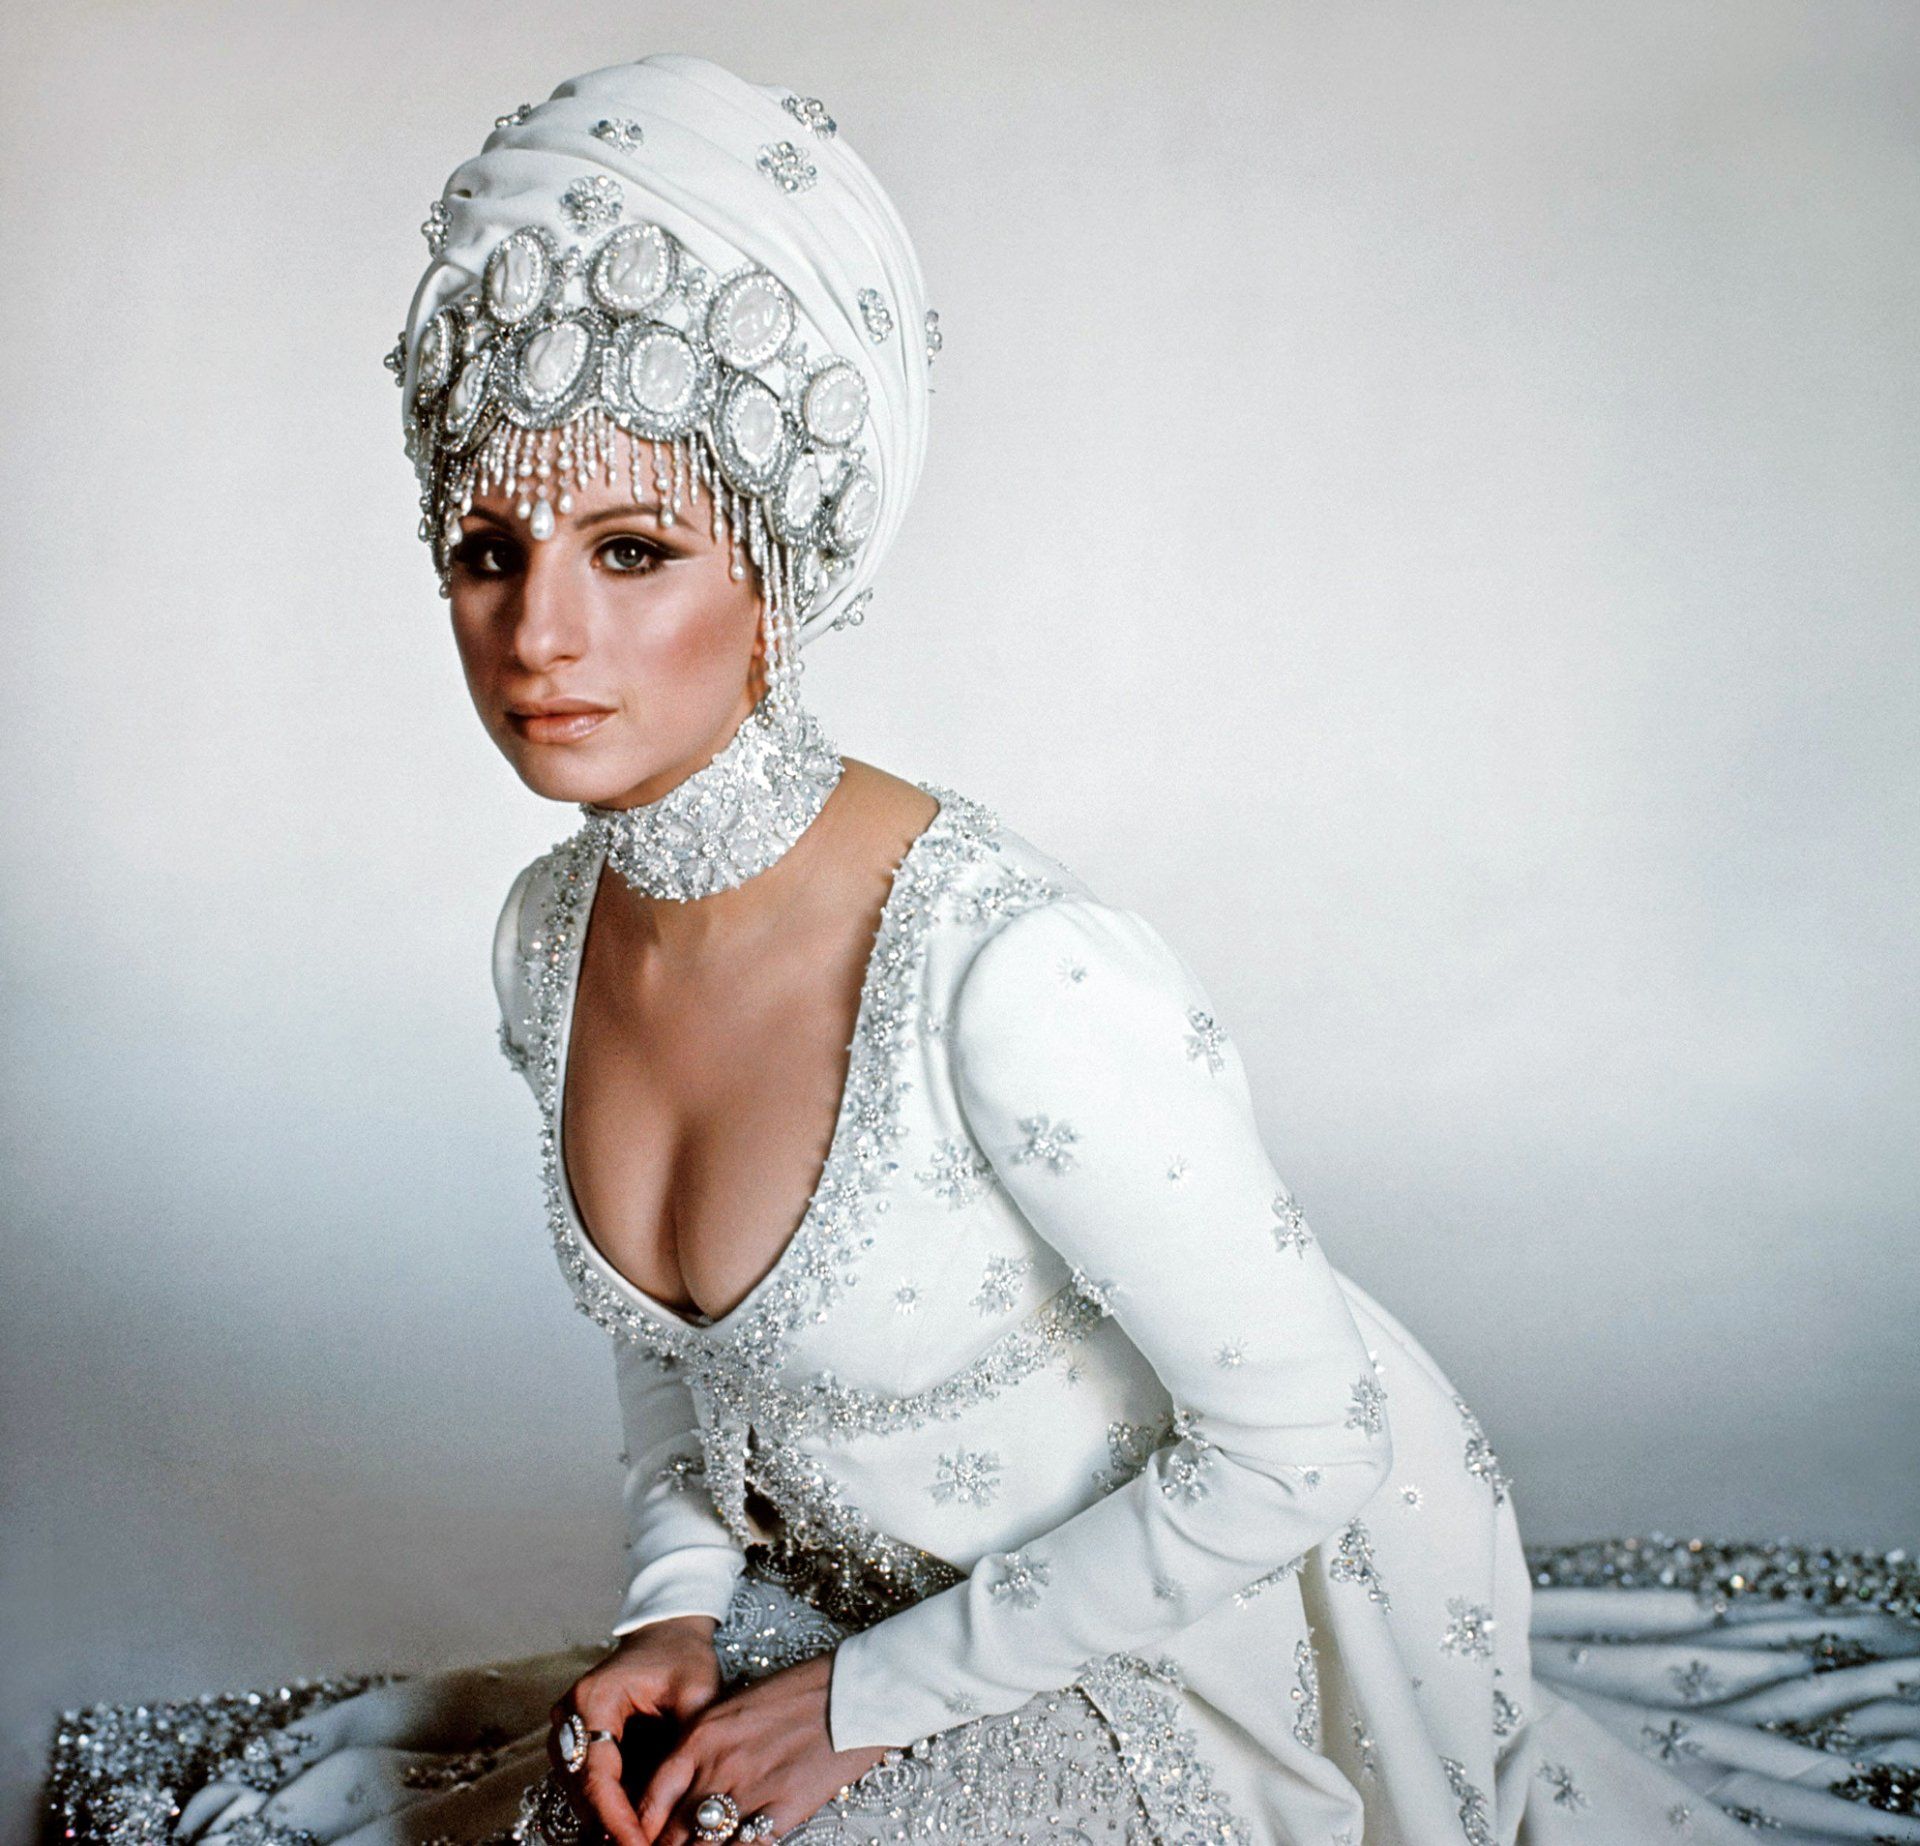 Streisand dressed in beautiful white turban and bejeweled gown.